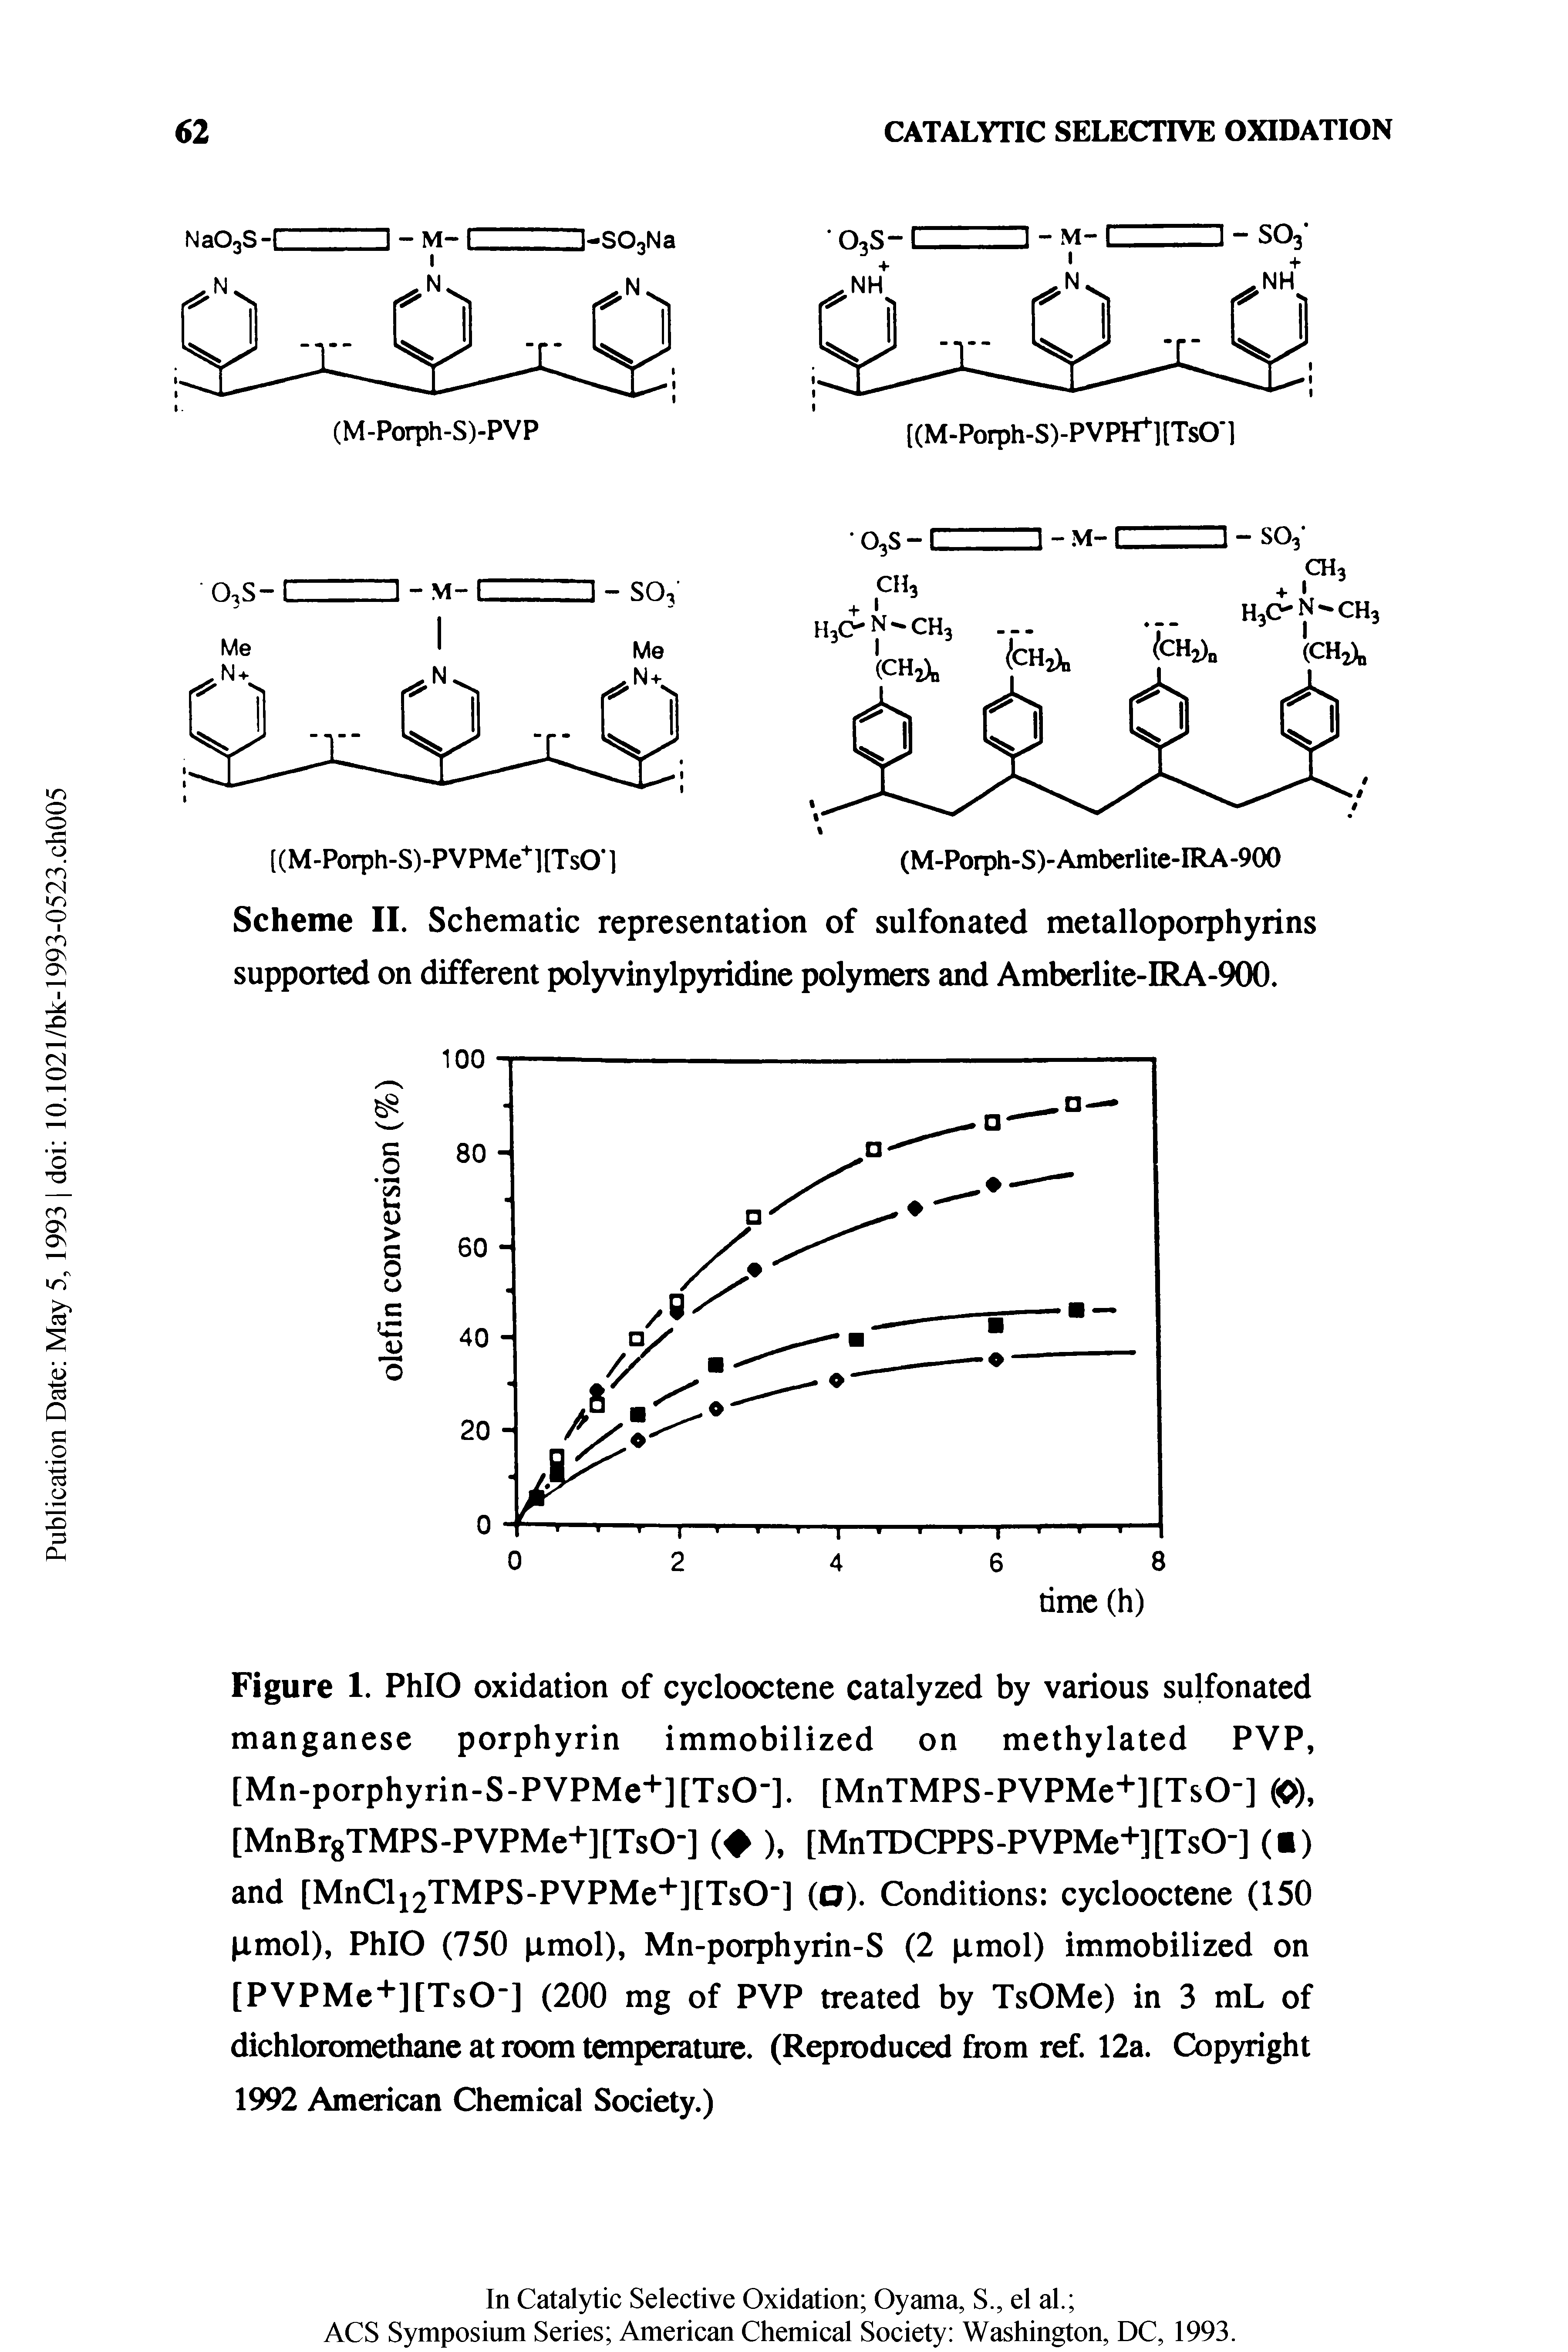 Scheme II. Schematic representation of sulfonated metalloporphyrins supported on different polyvinylpyridine polymers and Amberlite-IRA-900.